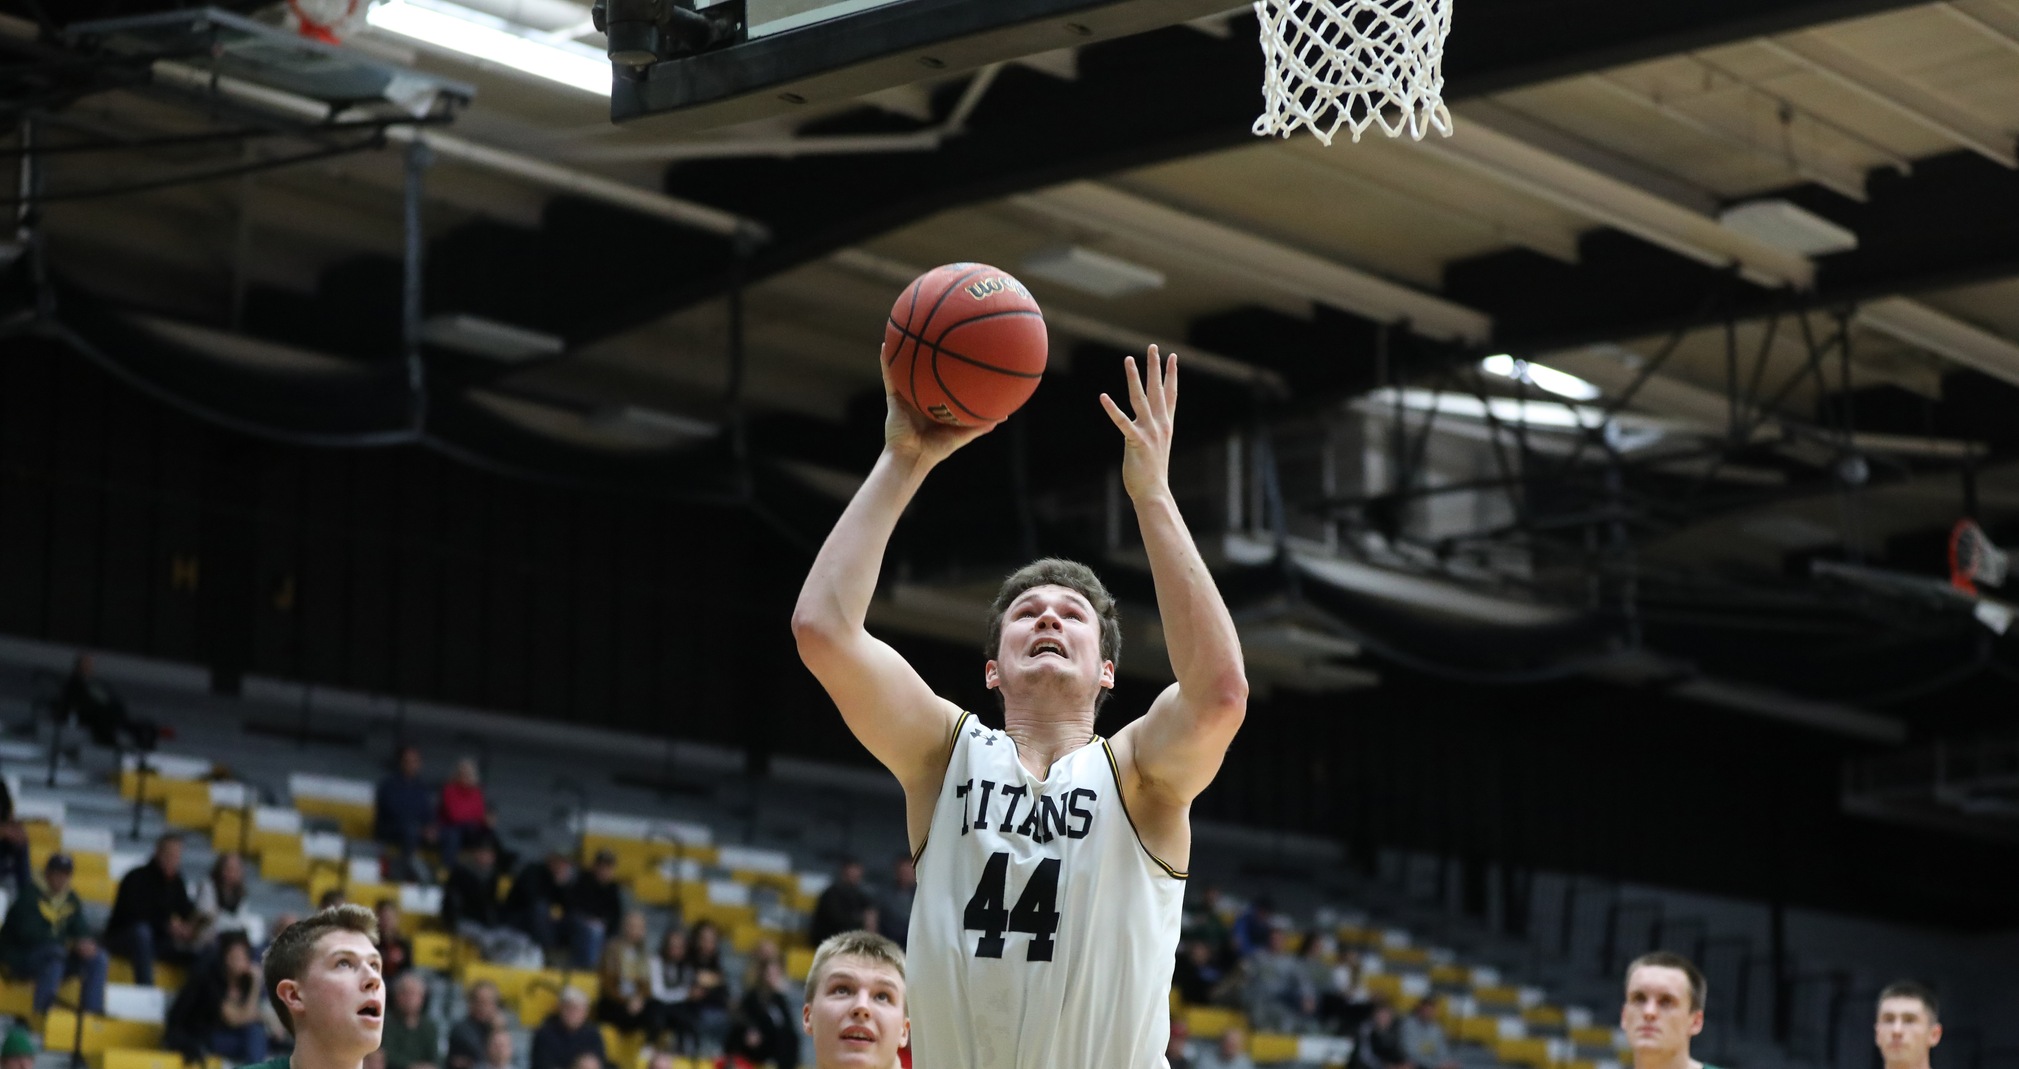 Jack Flynn totaled 13 points and 11 rebounds in the first half as UW-Oshkosh took a 45-29 lead to intermission.